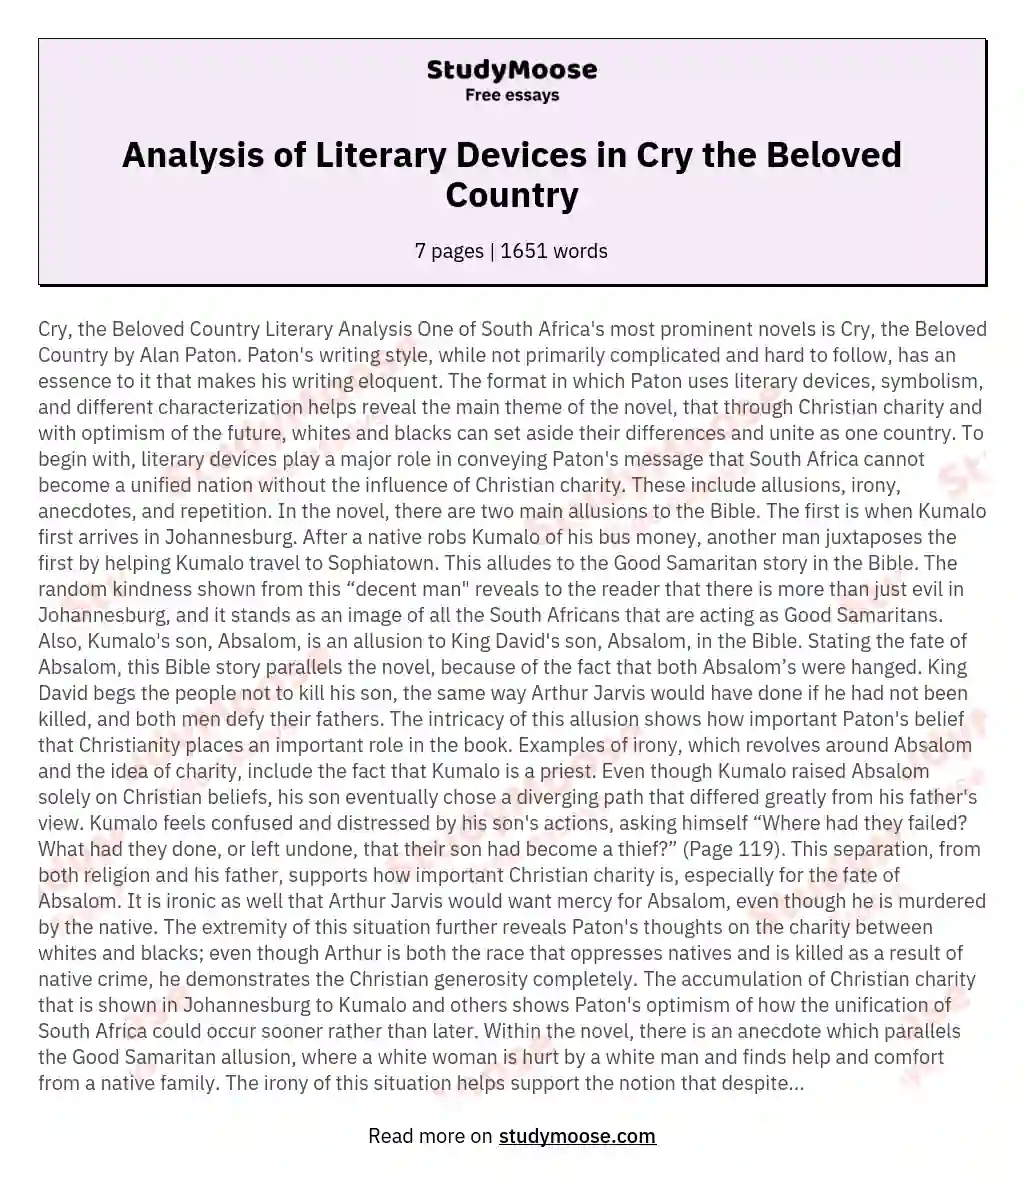 An Analysis of the Literary Devices Used in Cry the Beloved Country by Alan Paton